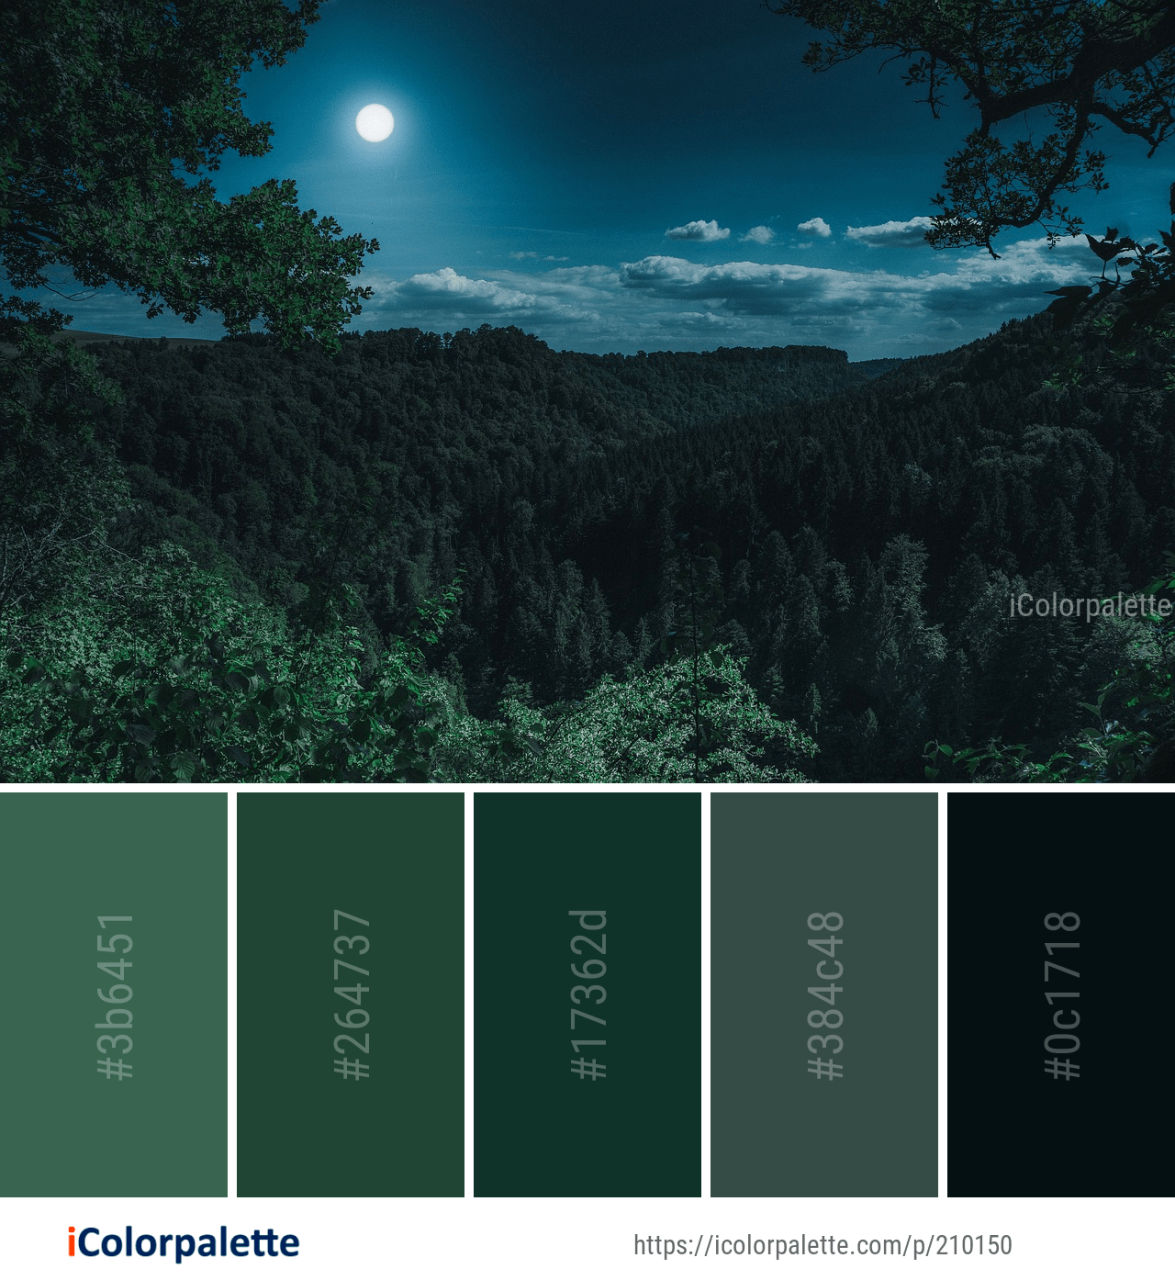 Color Palette ideas from 3368 Nature Images iColorpalette Hex color